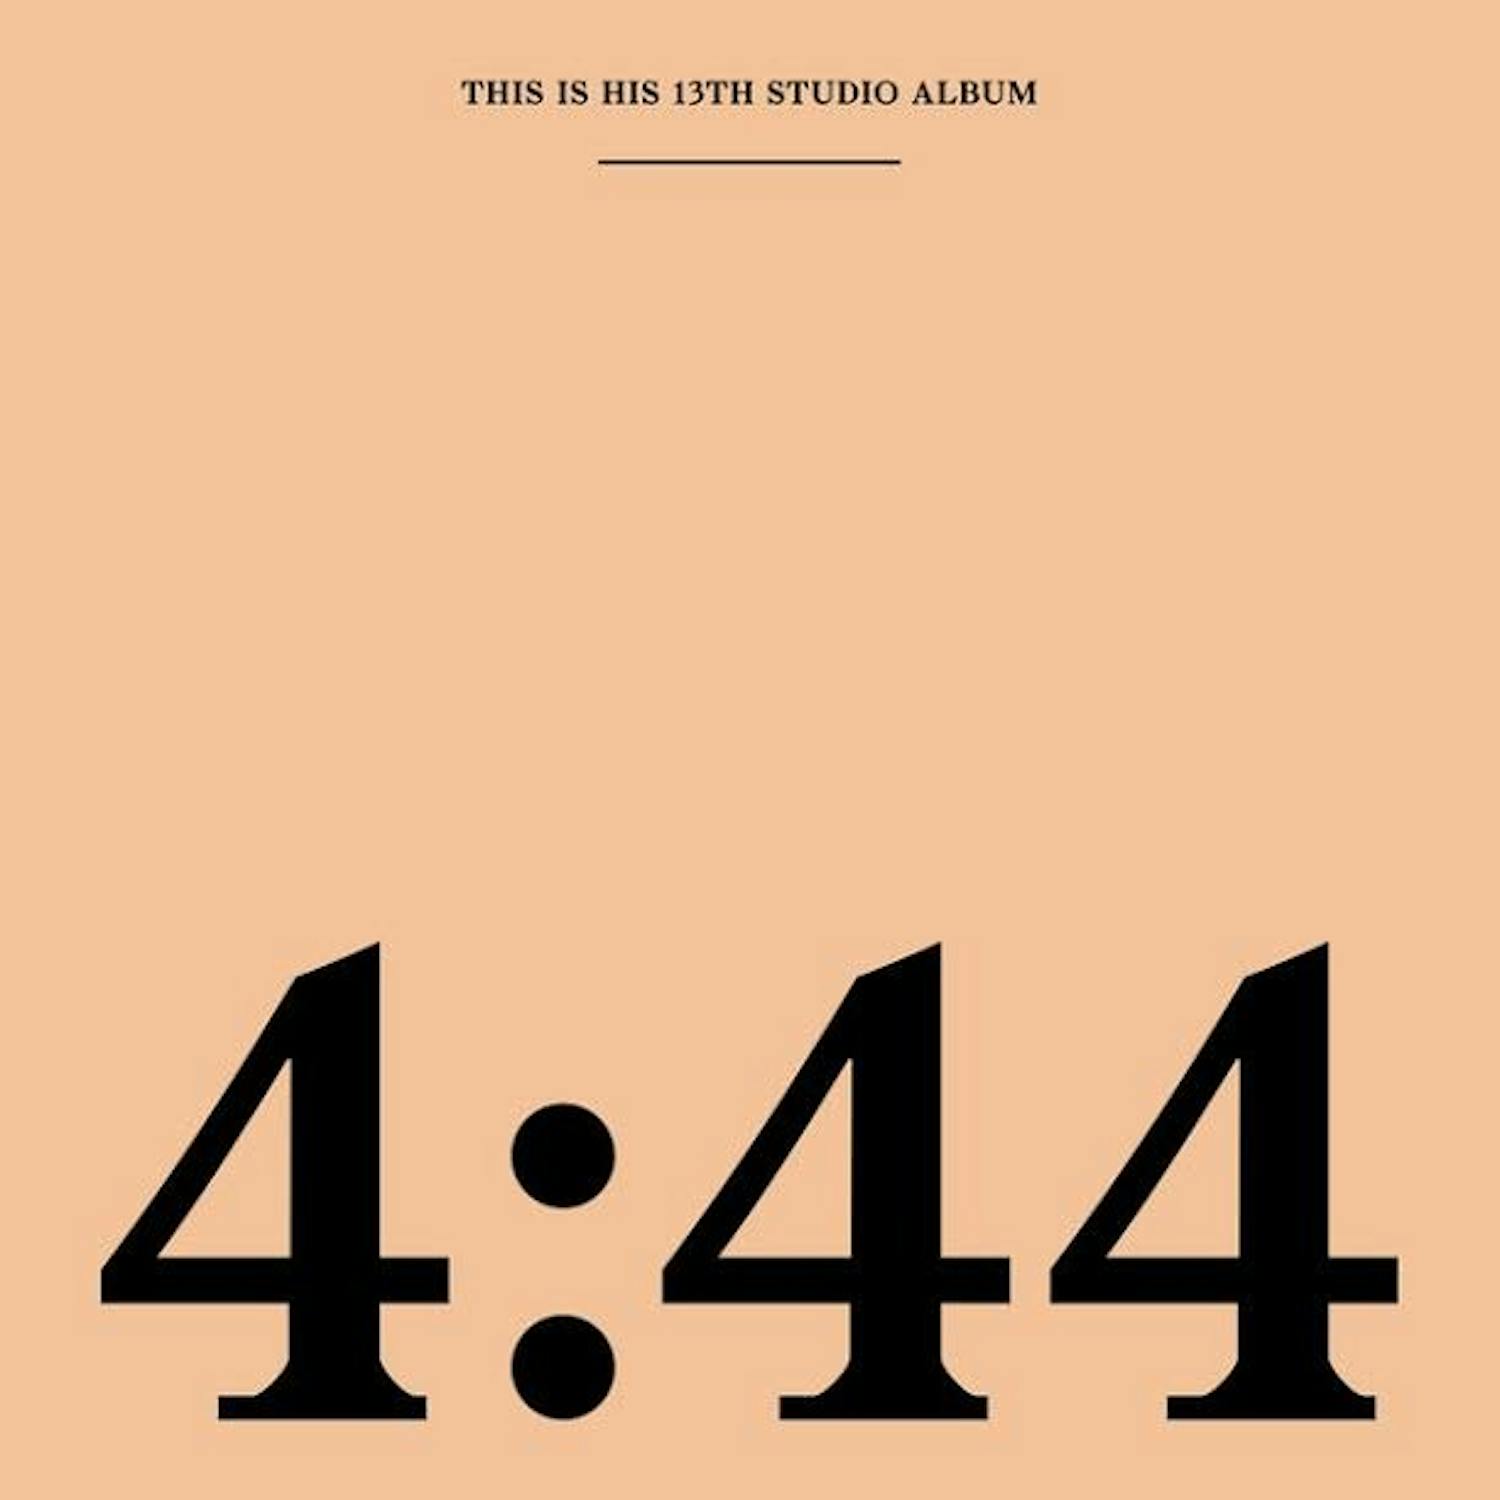 On 4:44, Jay-Z proves he's still a force in hip-hop. Tracks like "Caught Their Eyes" and "4:44" touch on a range of topics such as infidelity and black ownership.